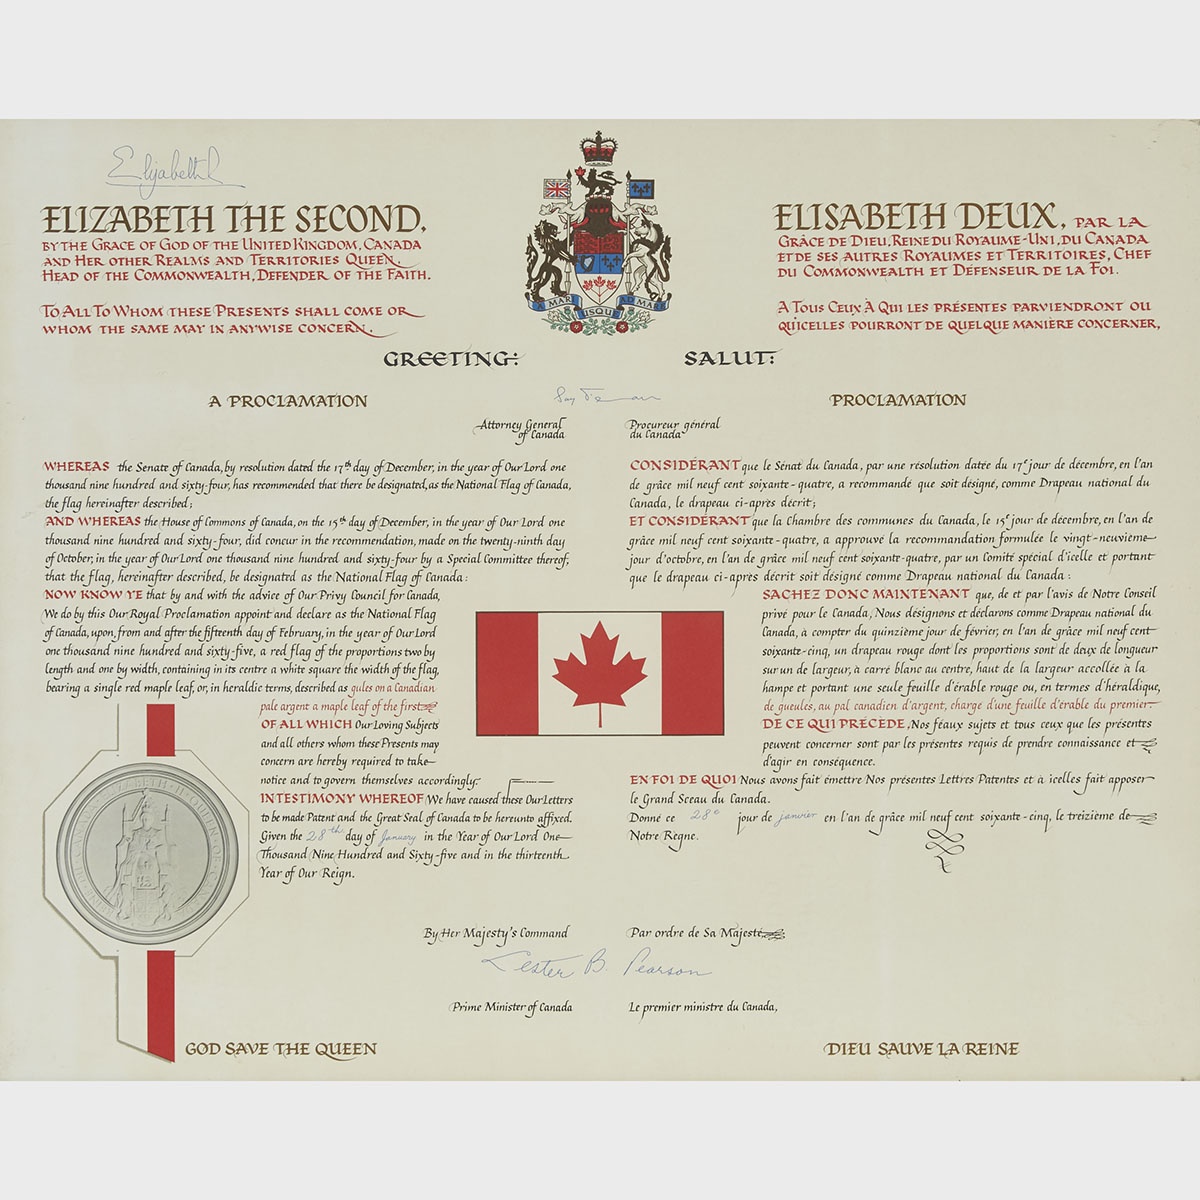 Commemorative Print of The National Flag of Canada Royal Proclamation, 1965